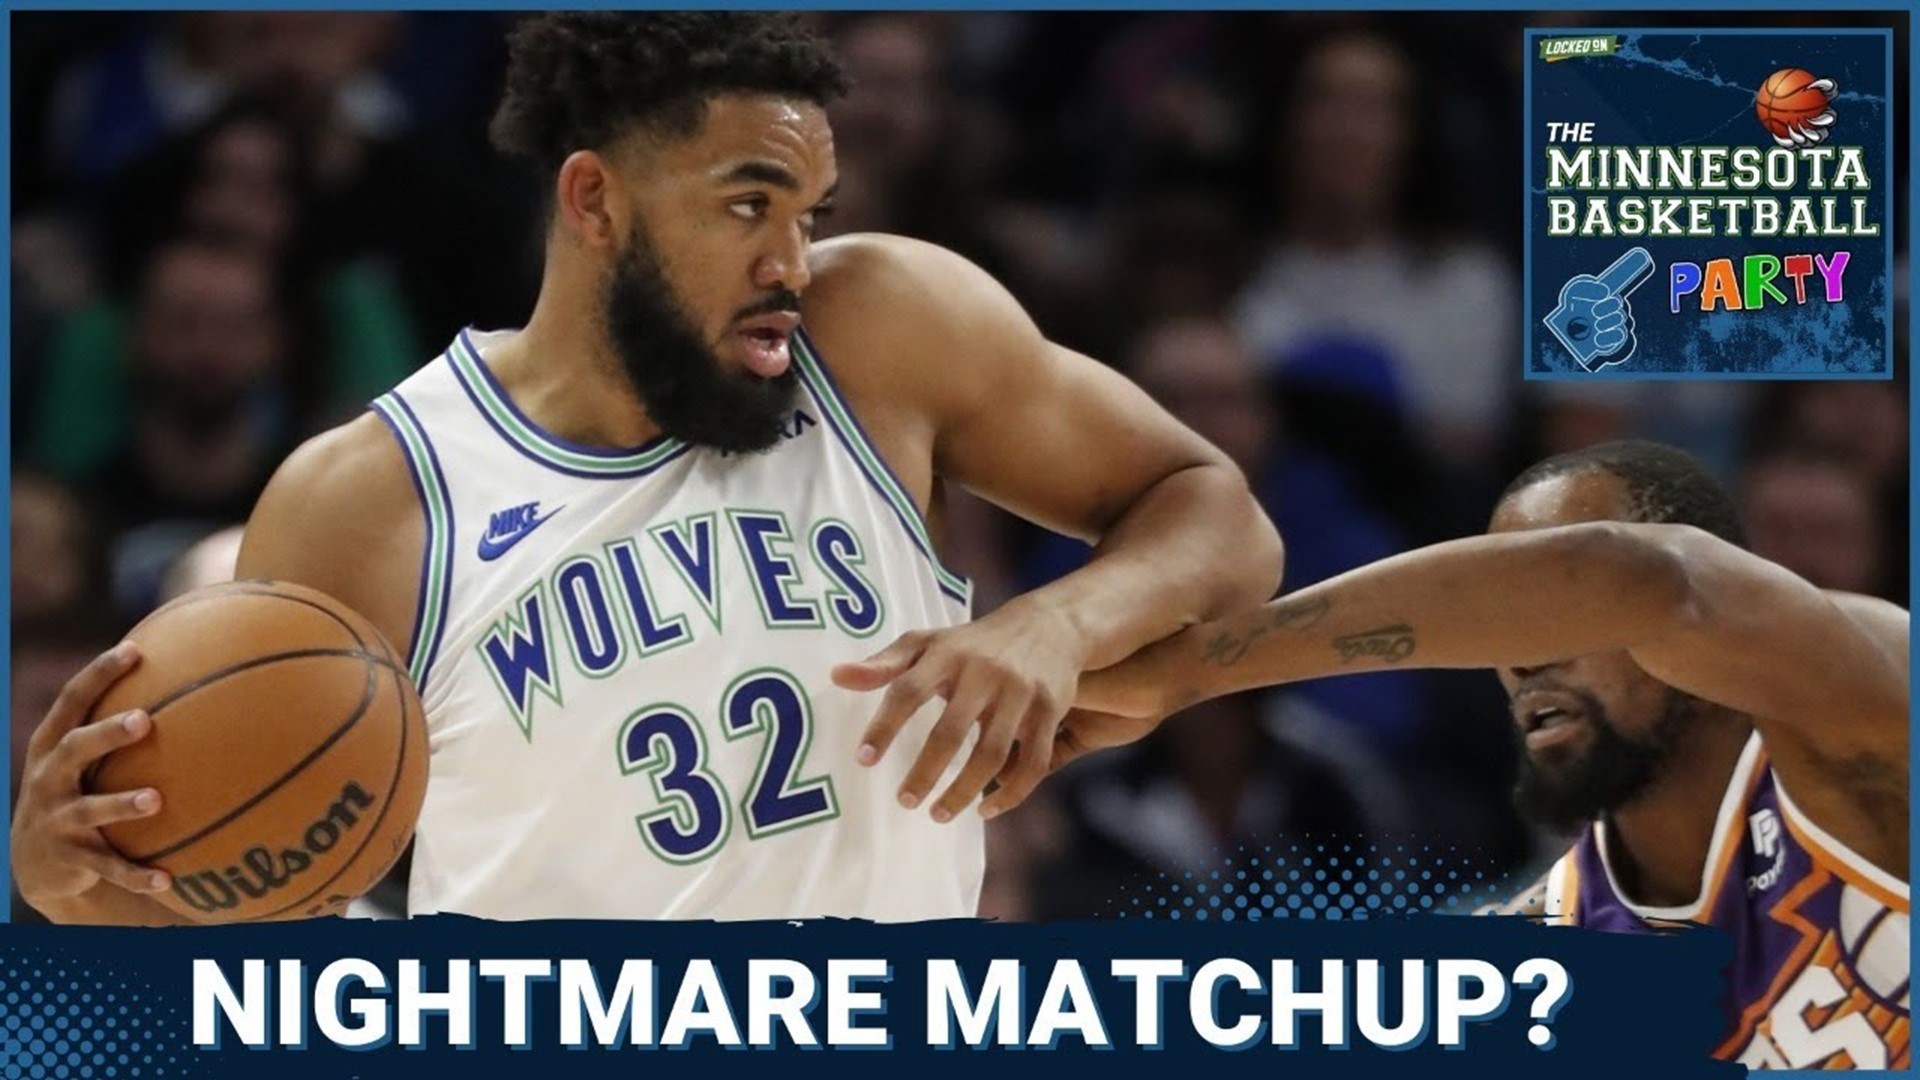 How the Minnesota Timberwolves Can BEAT the Phoenix Suns - The Minnesota Basketball Party